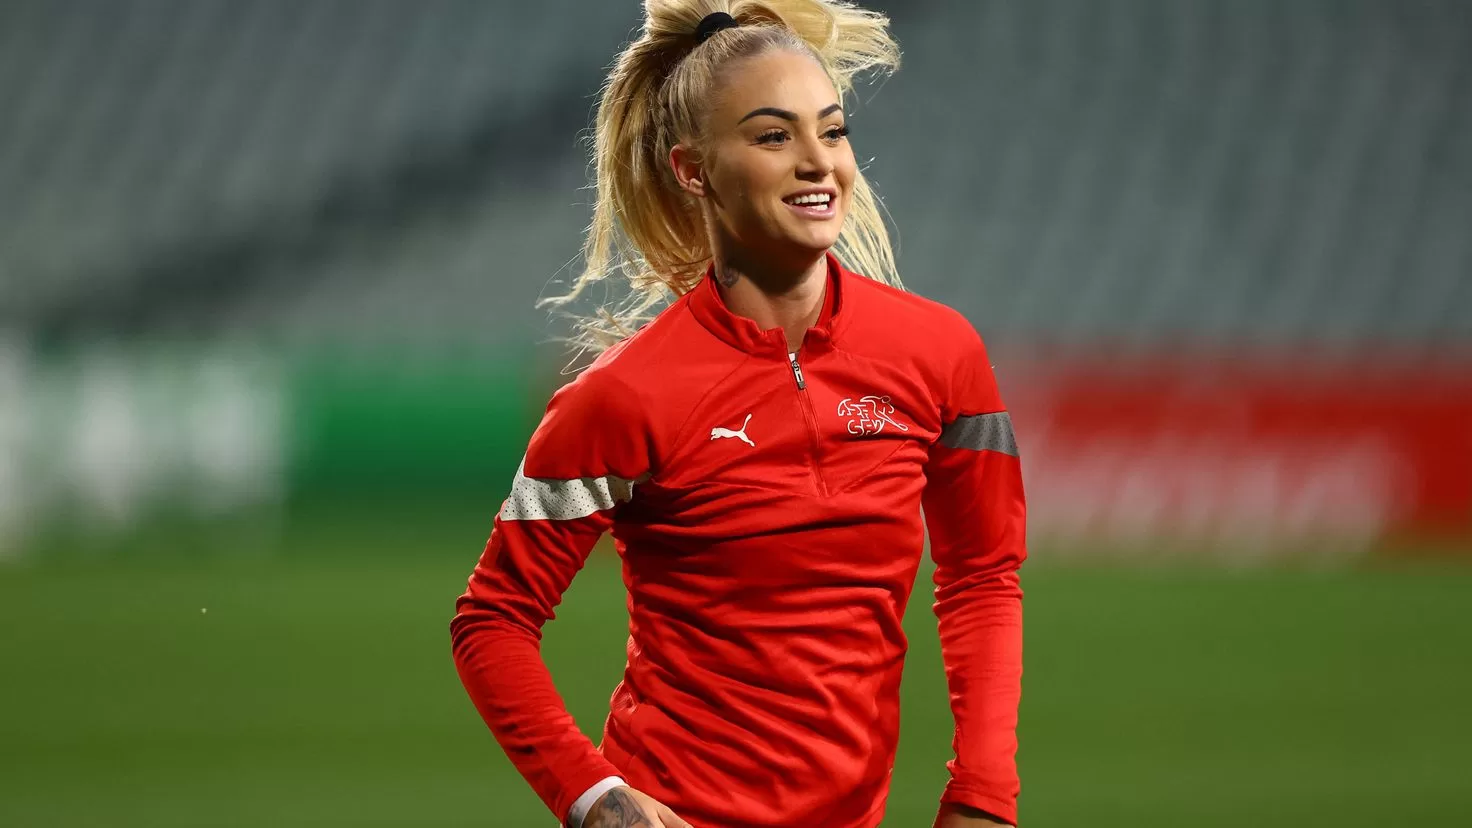 This is the life of Alisha Lehmann, the most viral striker in the World Cup that threatens Spain
